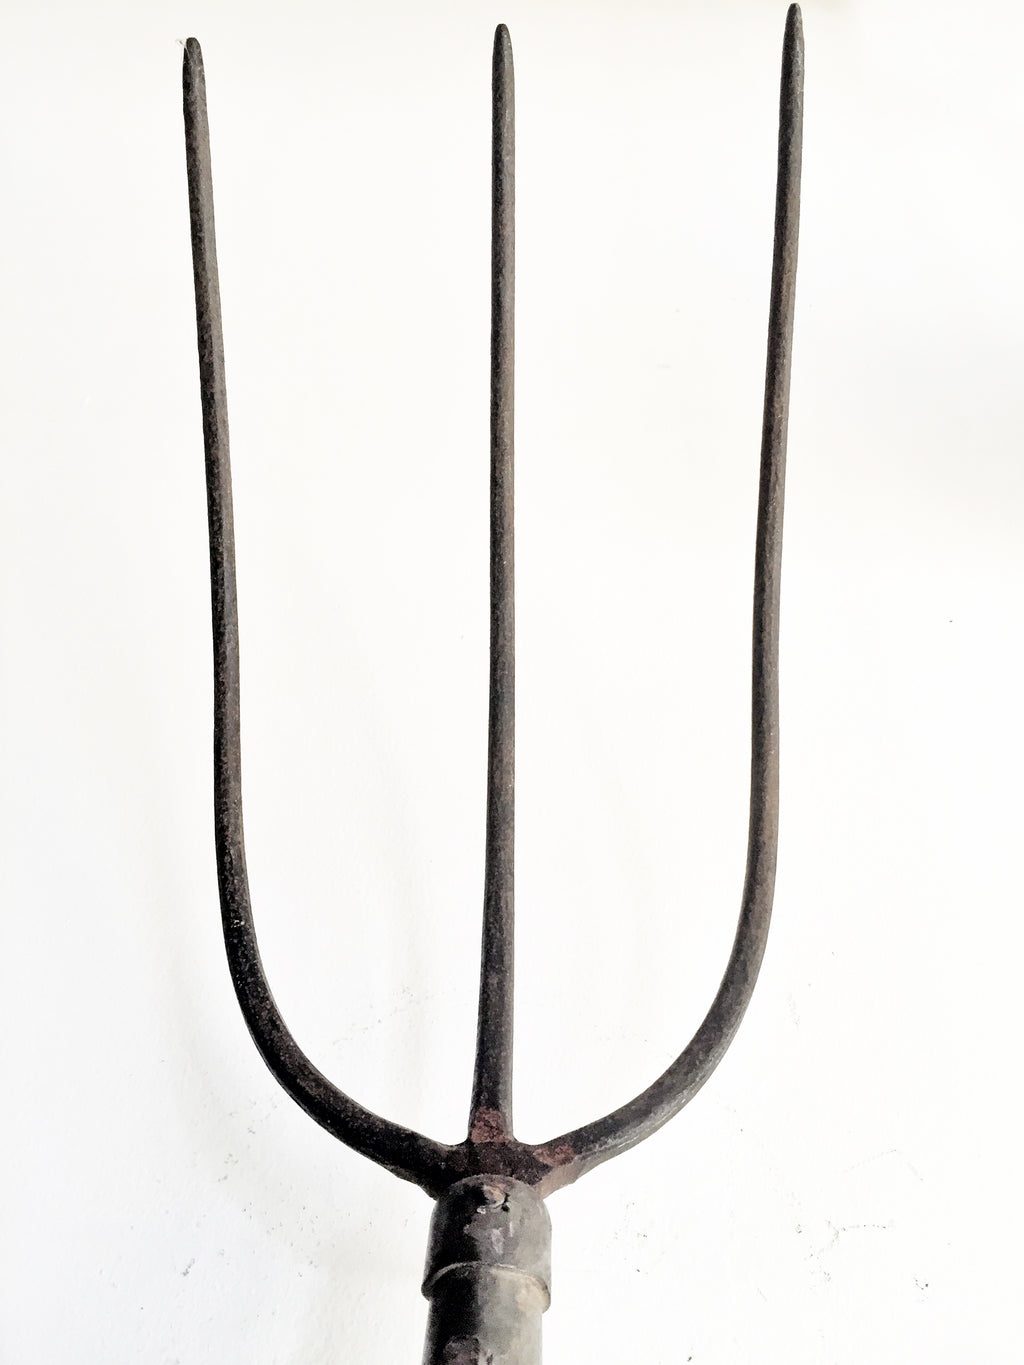 Primitive hand forged three tine pitch hay fork